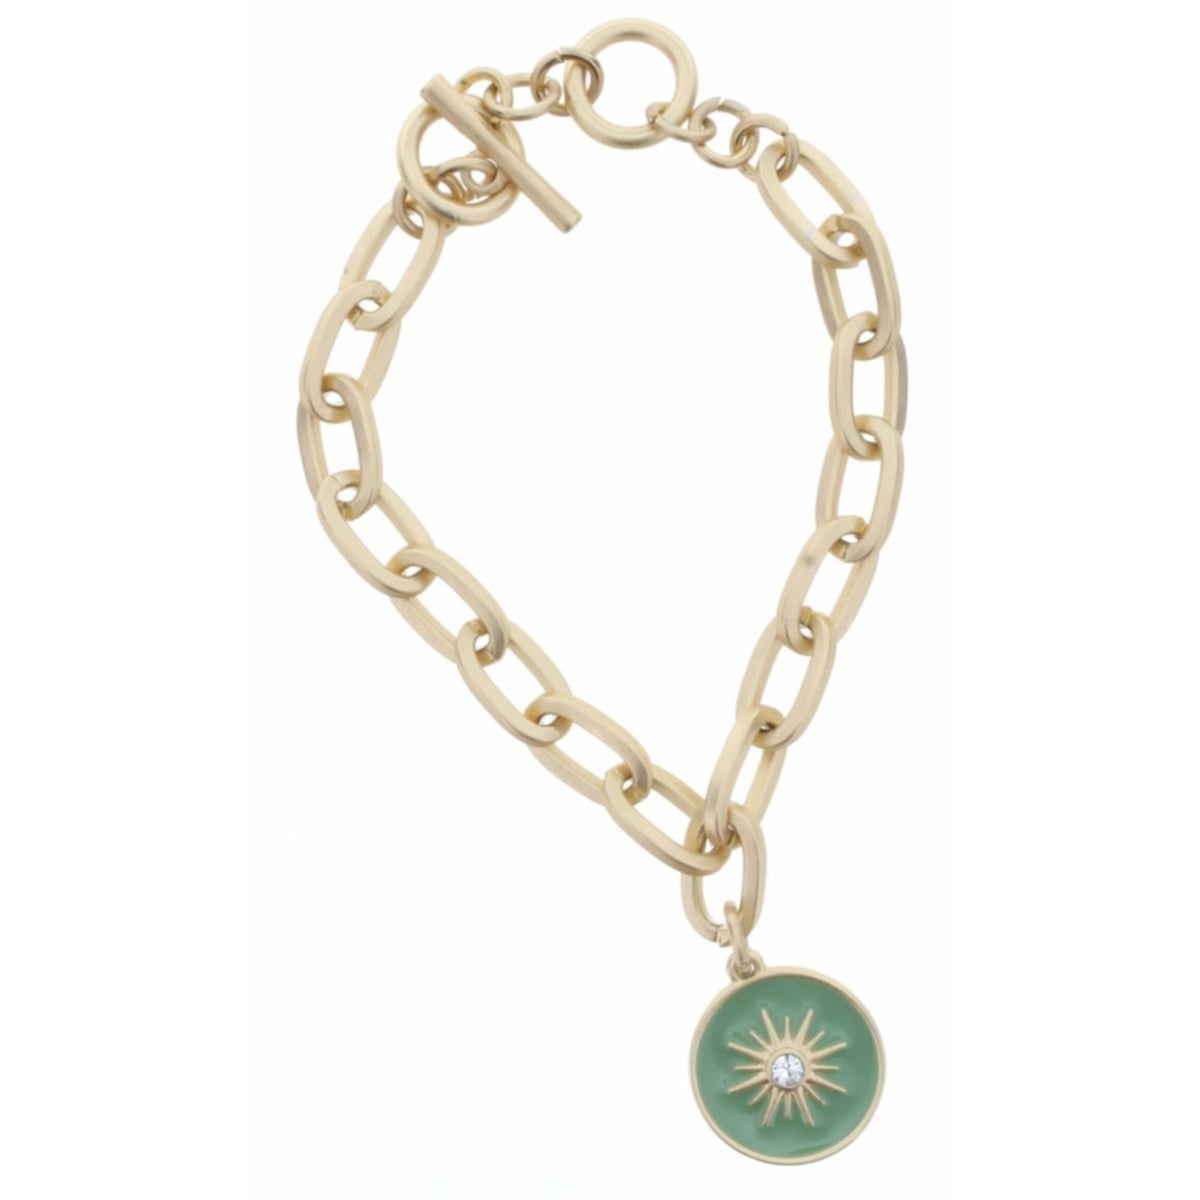 Gold Toggle Chain with Clear Czech Center Sun in Mint Enamel Charm Bracelet